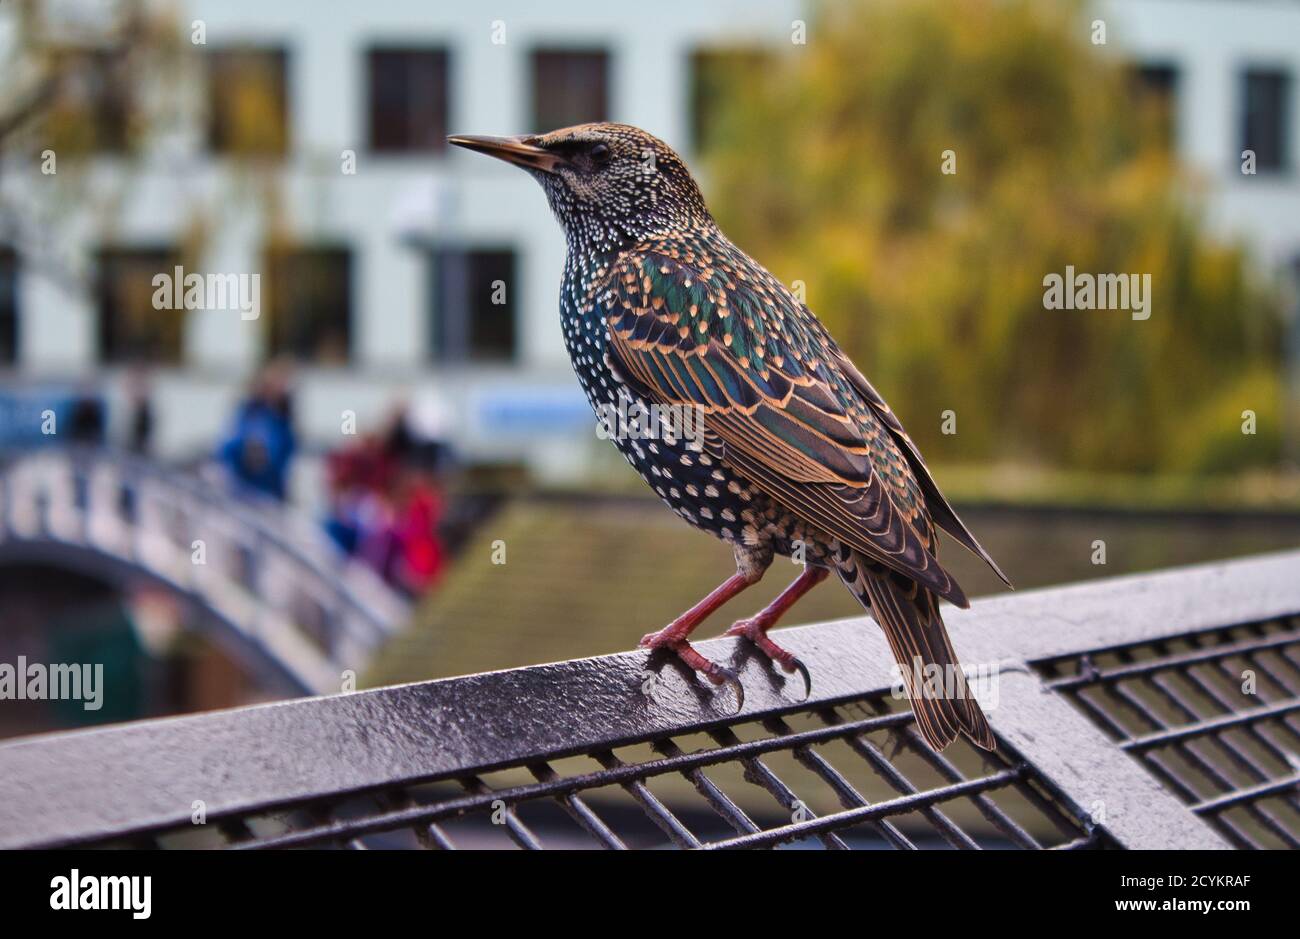 Common starling on a fence in Camdem market Stock Photo